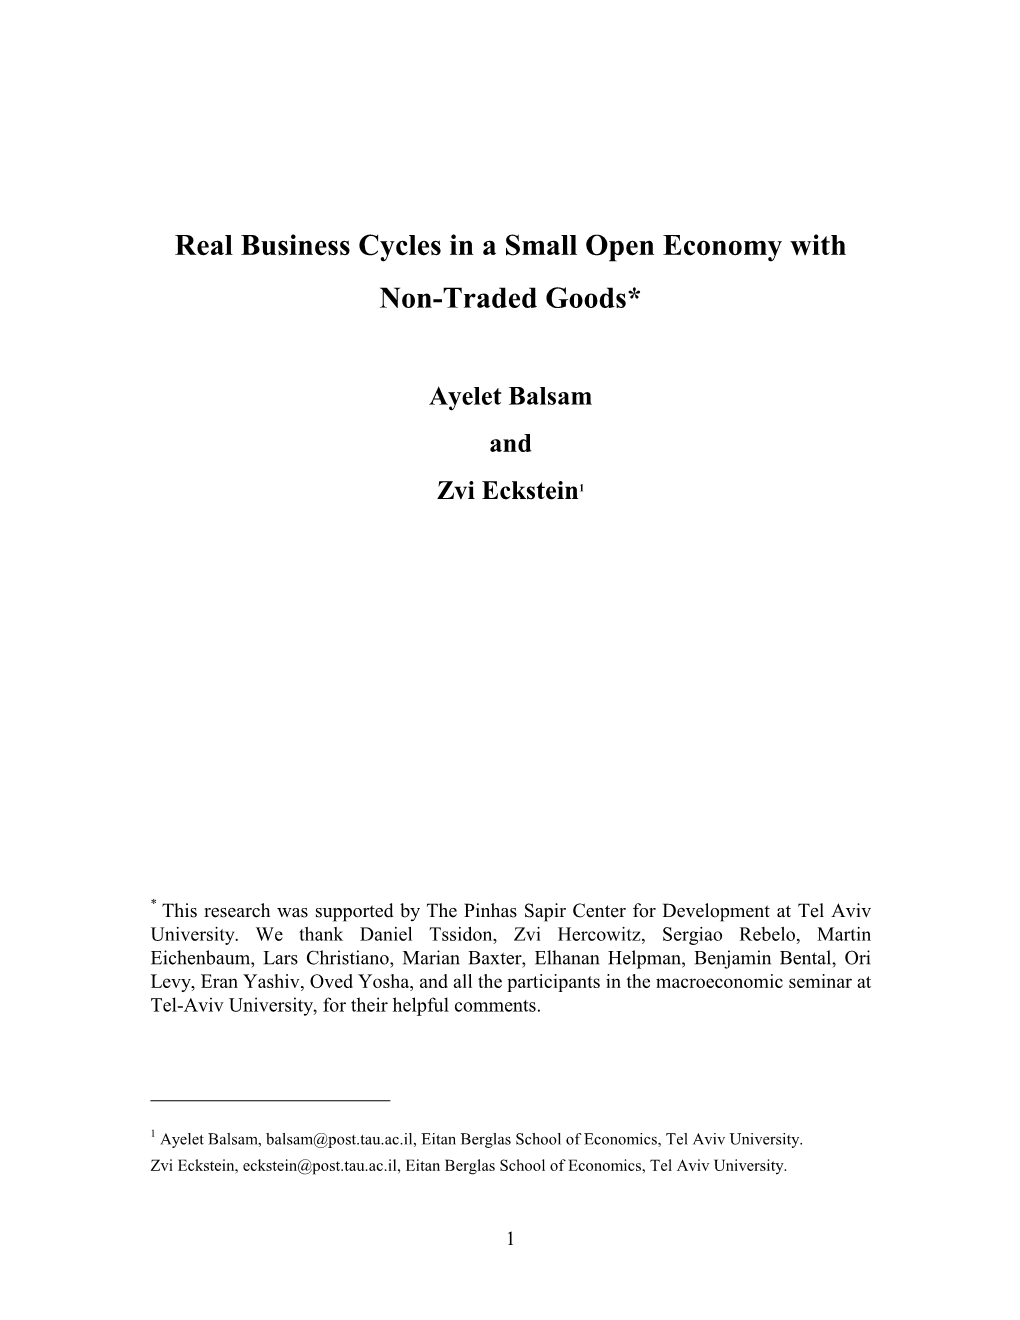 Real Business Cycles in a Small Open Economy with Non-Traded Goods*